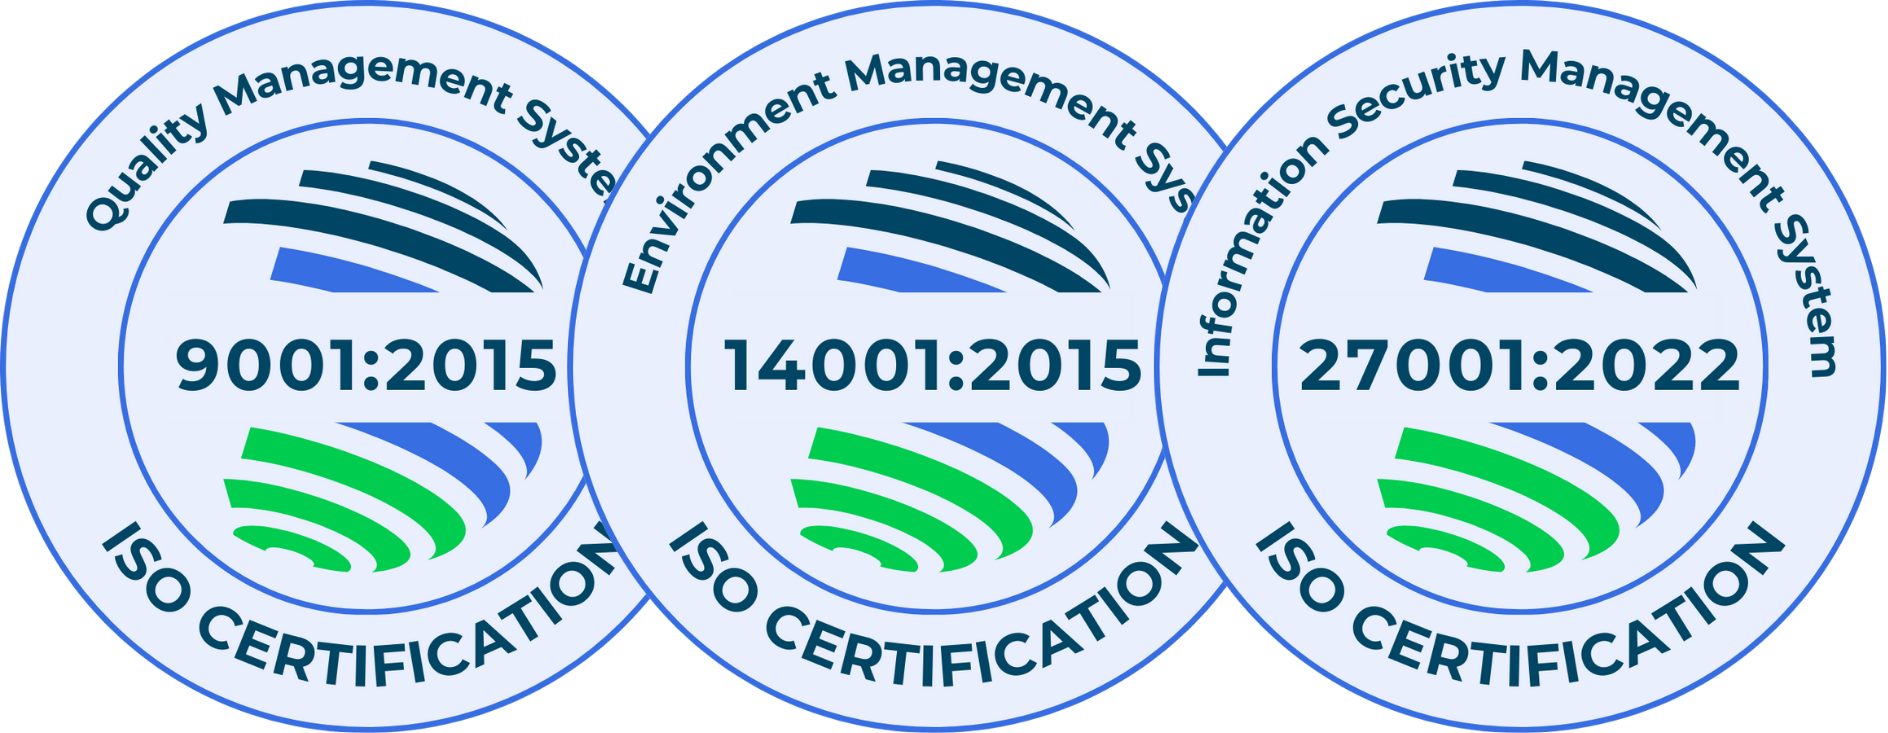 Three circular ISO certification seals; from left to right: "Quality Management System ISO 9001:2015," "Environment Management System ISO 14001:2015," and "Information Security Management System ISO 27001:2022," each with a green checkmark design.